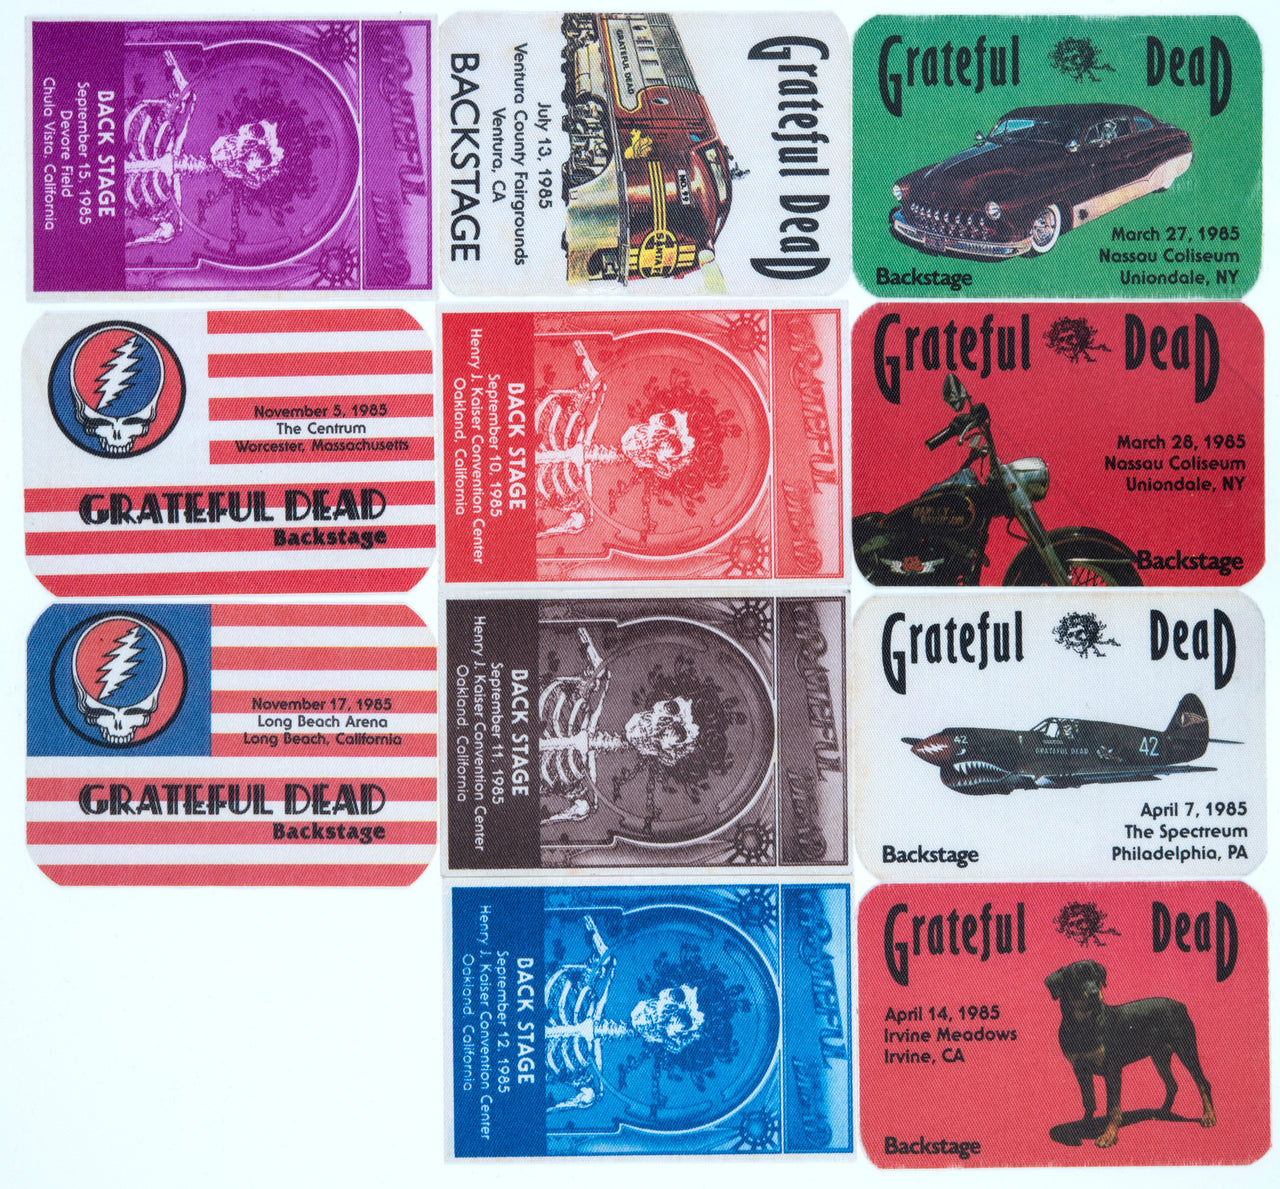 Grateful Dead Backstage Passes (3/27/1985 - 11/17/1985) from Dan Healy